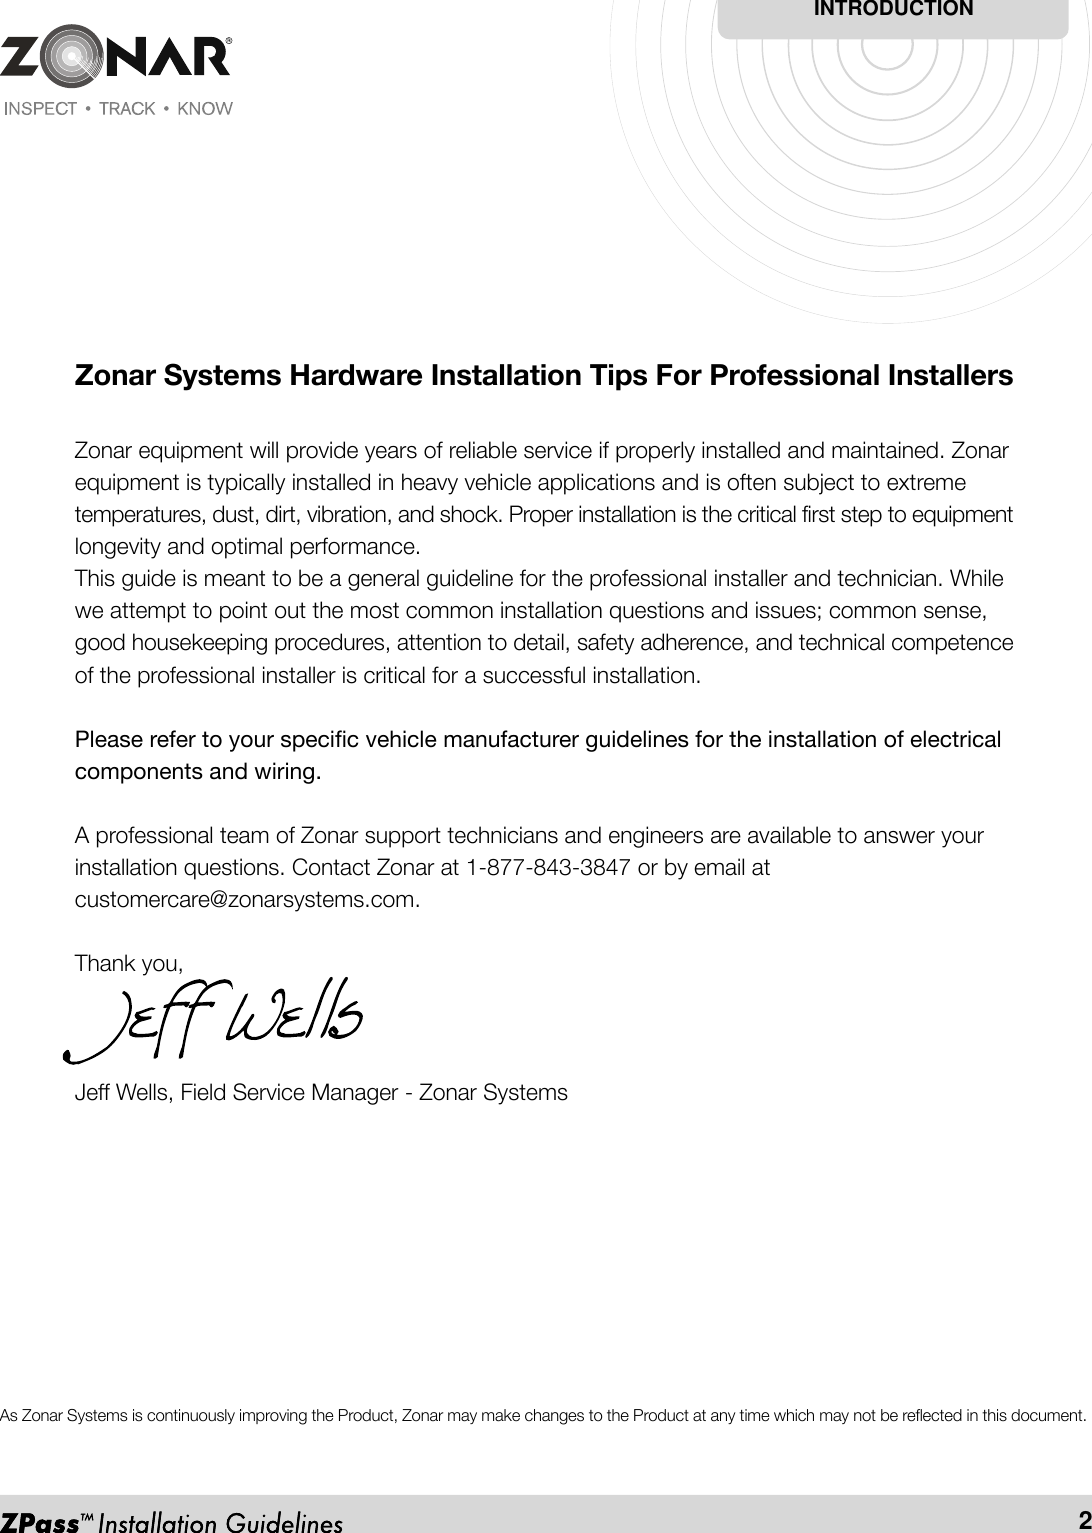 INTRODUCTION2Zonar Systems Hardware Installation Tips For Professional InstallersZonar equipment will provide years of reliable service if properly installed and maintained. Zonarequipment is typically installed in heavy vehicle applications and is often subject to extremetemperatures, dust, dirt, vibration, and shock. Proper installation is the critical first step to equipmentlongevity and optimal performance.This guide is meant to be a general guideline for the professional installer and technician. Whilewe attempt to point out the most common installation questions and issues; common sense,good housekeeping procedures, attention to detail, safety adherence, and technical competenceof the professional installer is critical for a successful installation.Please refer to your specific vehicle manufacturer guidelines for the installation of electricalcomponents and wiring.A professional team of Zonar support technicians and engineers are available to answer yourinstallation questions. Contact Zonar at 1-877-843-3847 or by email atcustomercare@zonarsystems.com.Thank you,Jeff Wells, Field Service Manager - Zonar SystemsAs Zonar Systems is continuously improving the Product, Zonar may make changes to the Product at any time which may not be reflected in this document.